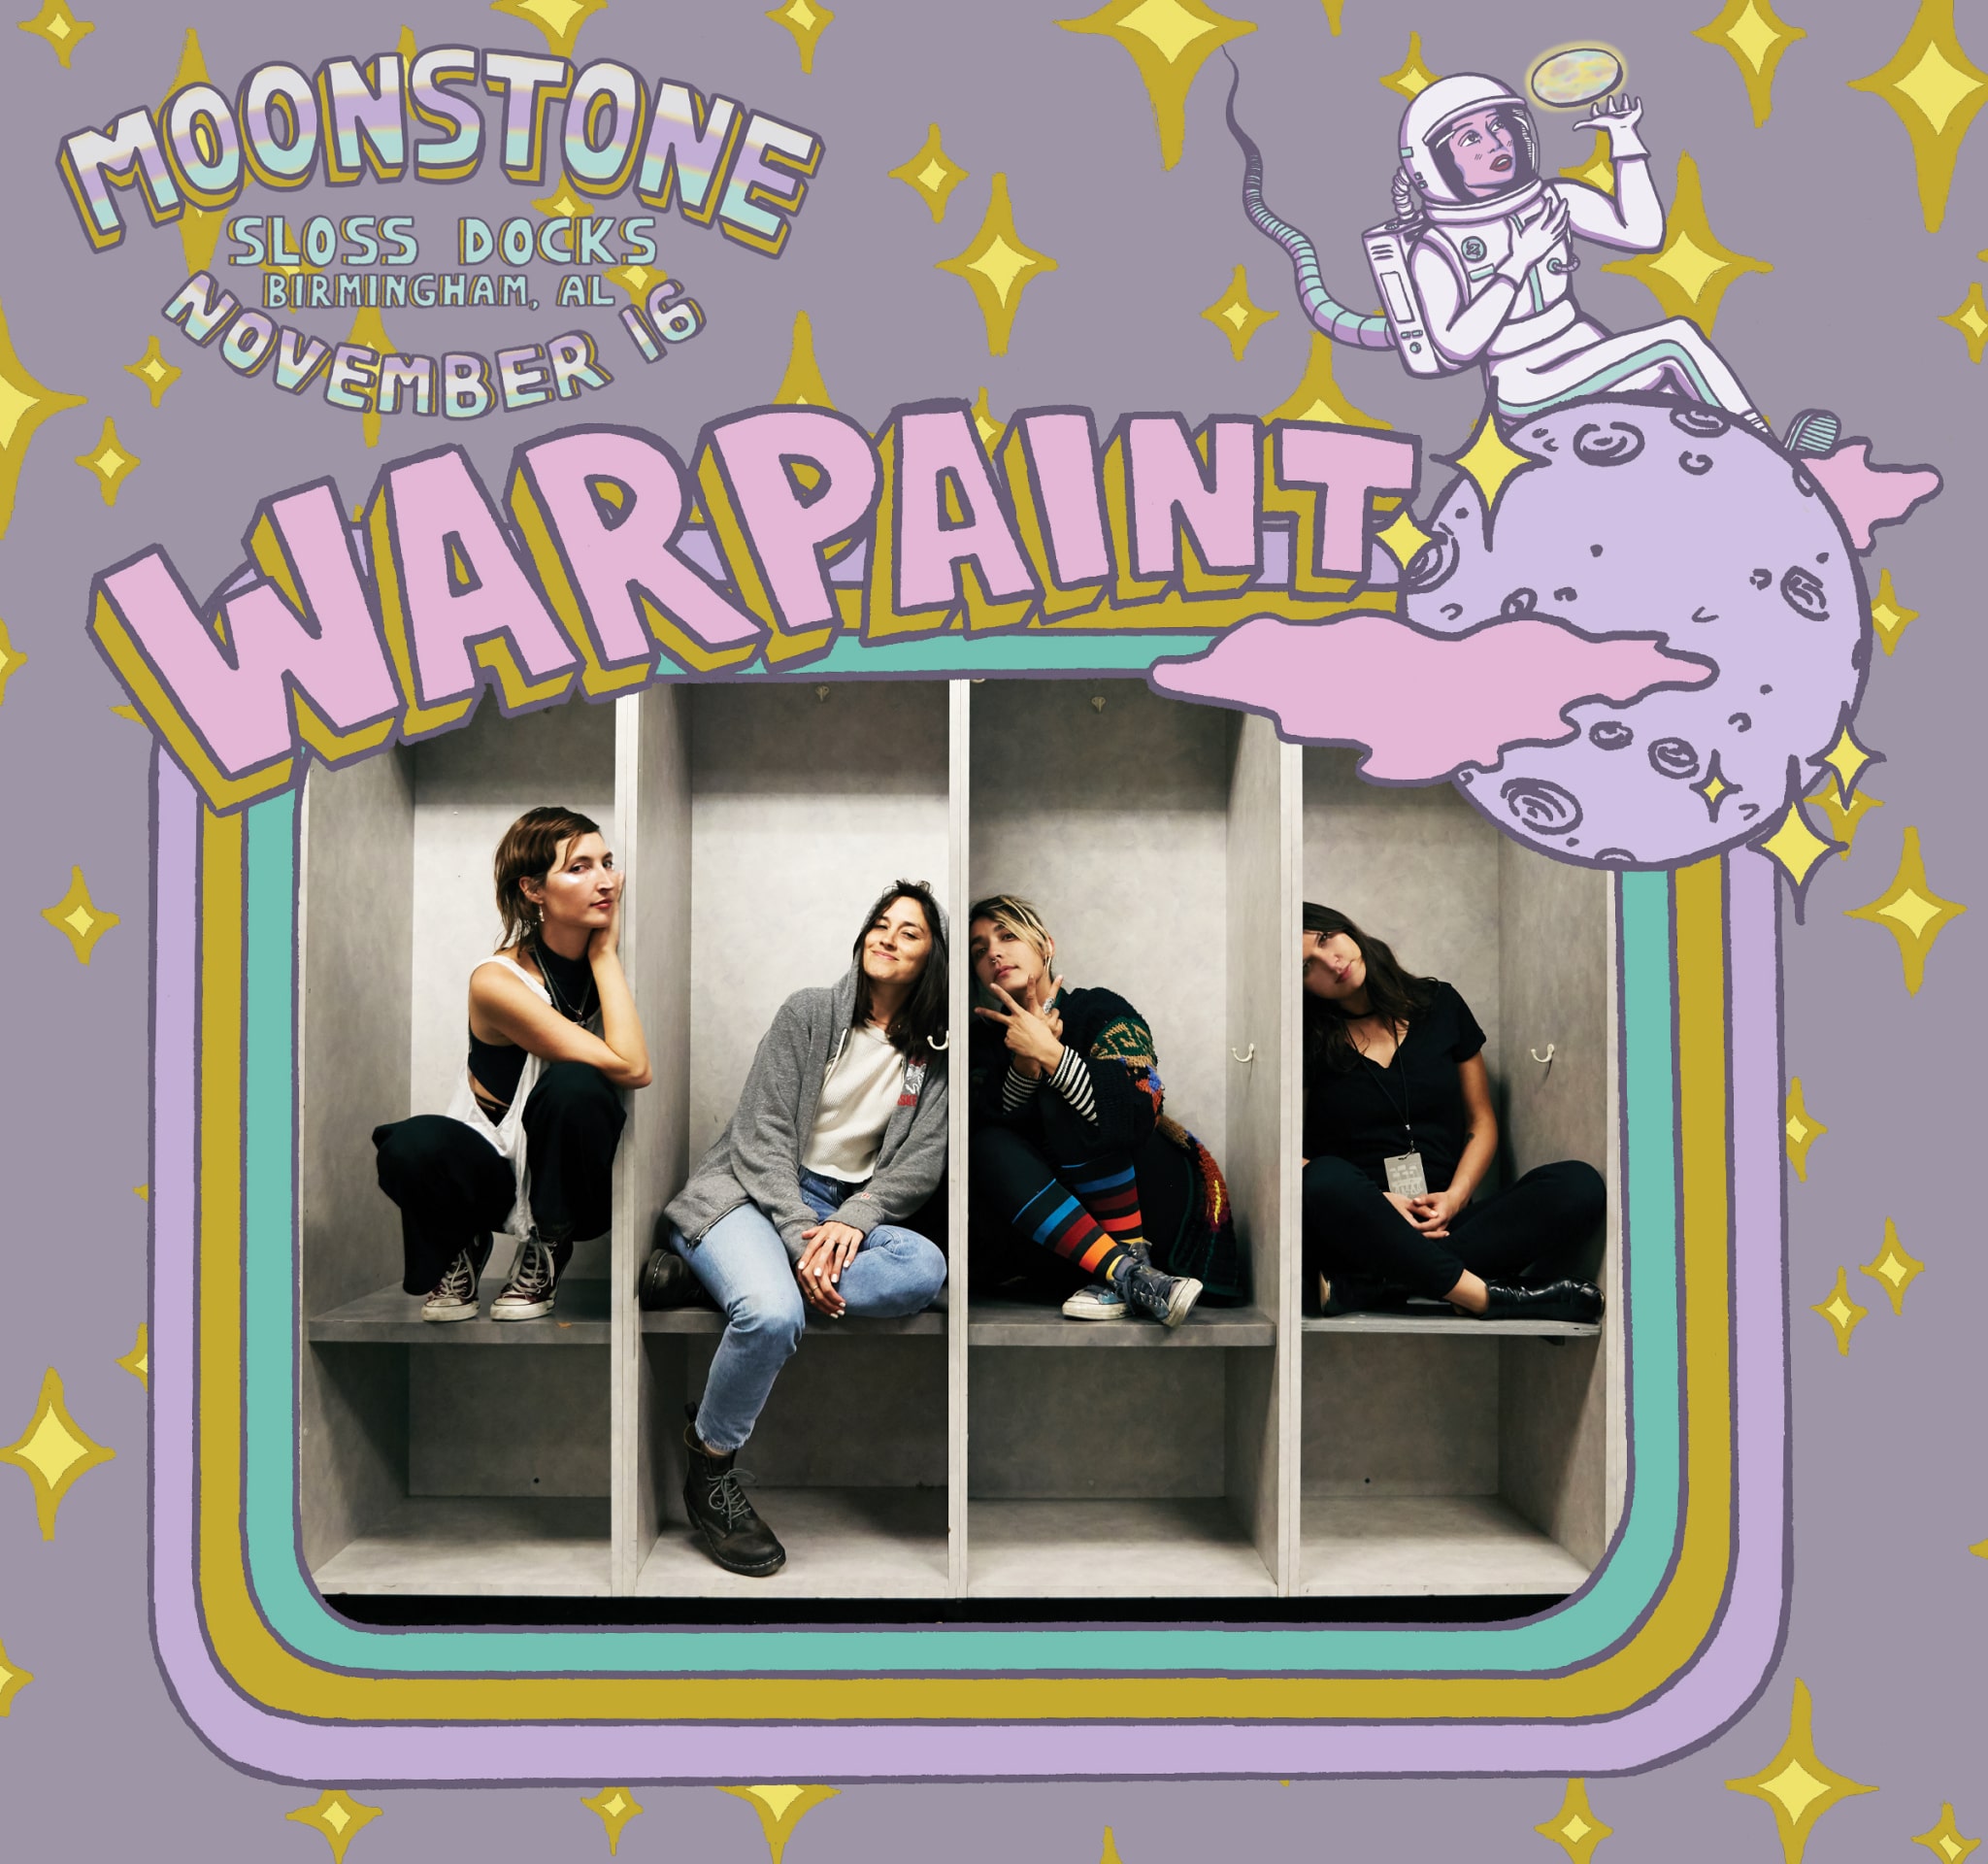 warpaint annouce Moonstone Festival, a female focused music and arts fest, happening Nov. 16th at Sloss Docks. Win VIP tickets!